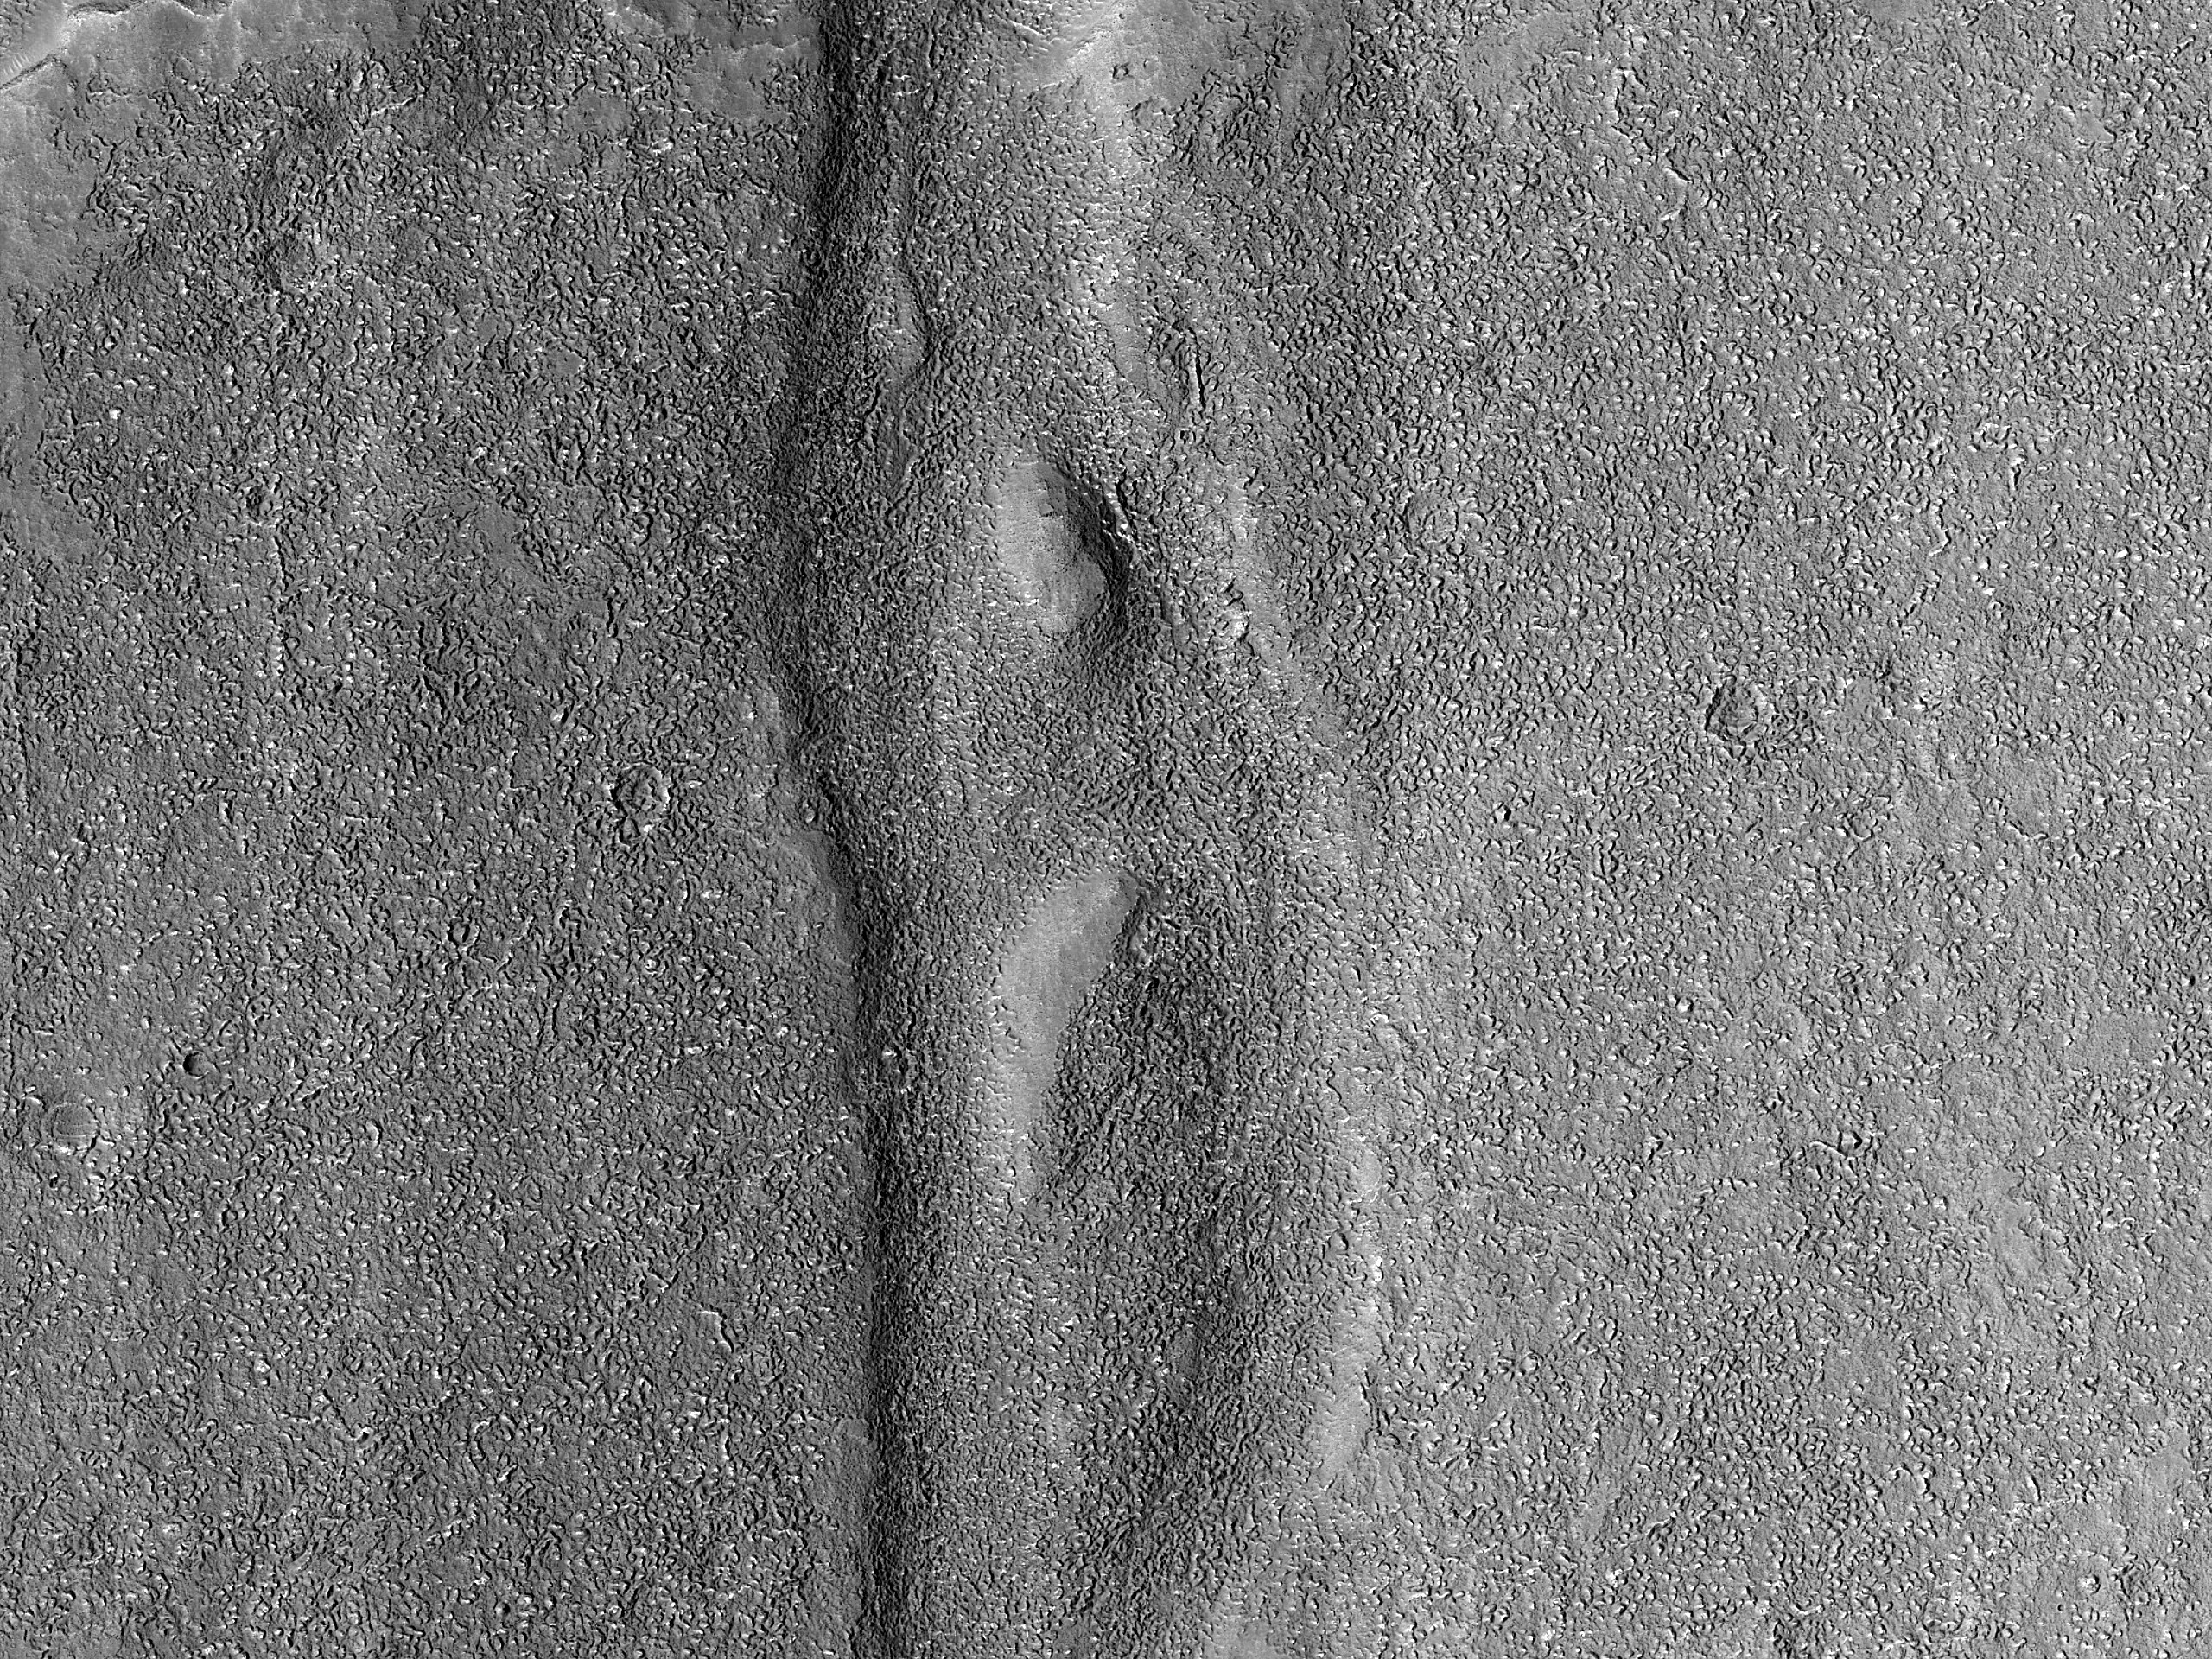 Streamlined Forms in Coracis Fossae